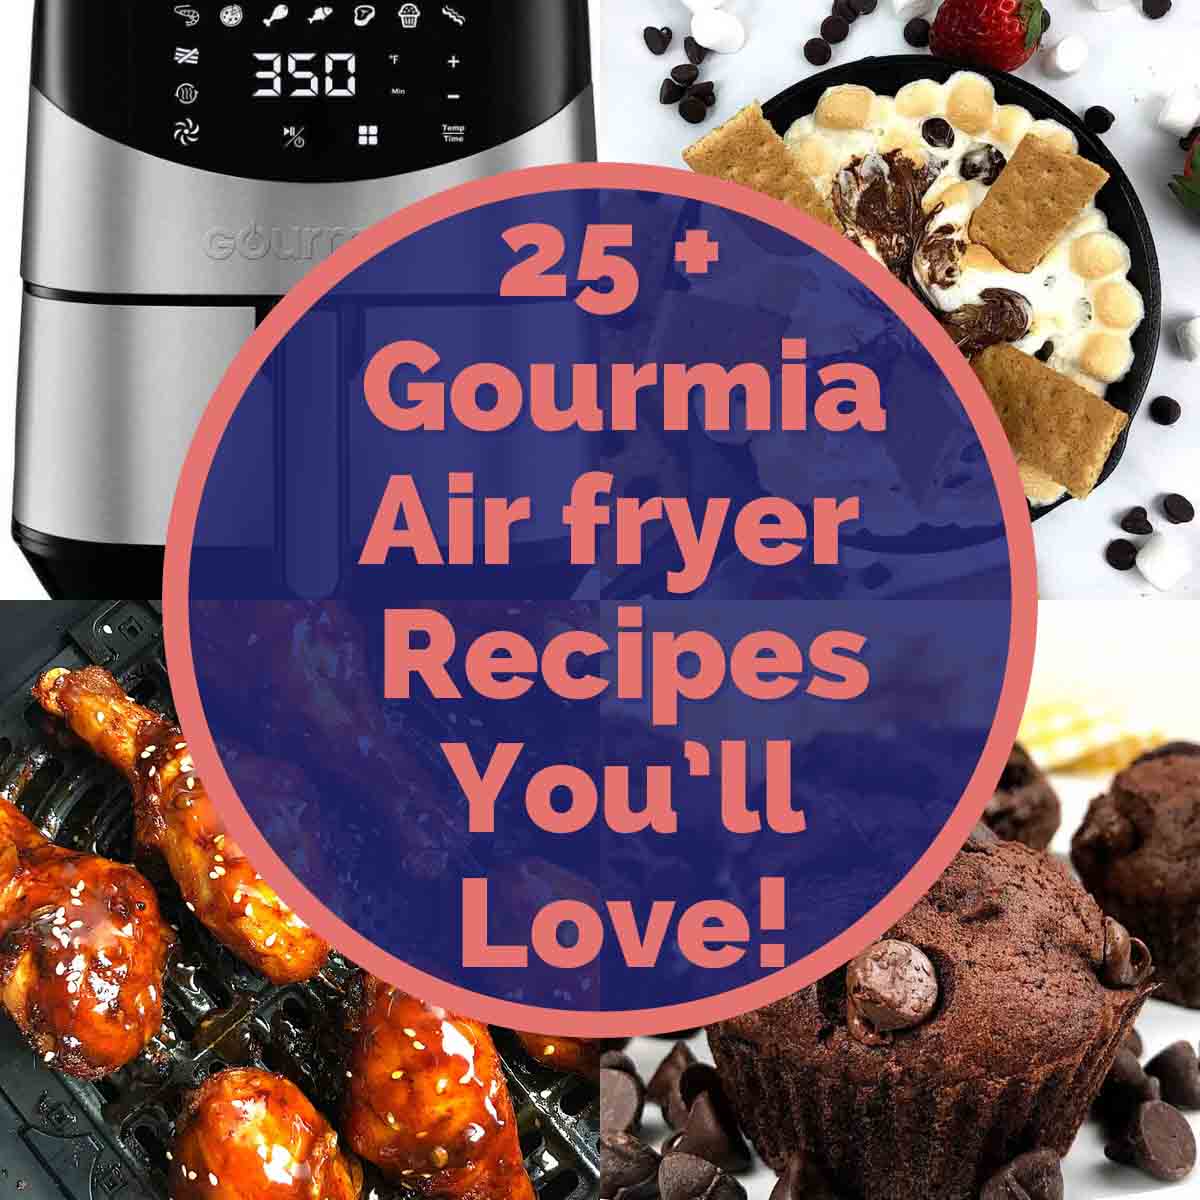 Get a healthy twist on fried foods with an air fryer for any budget